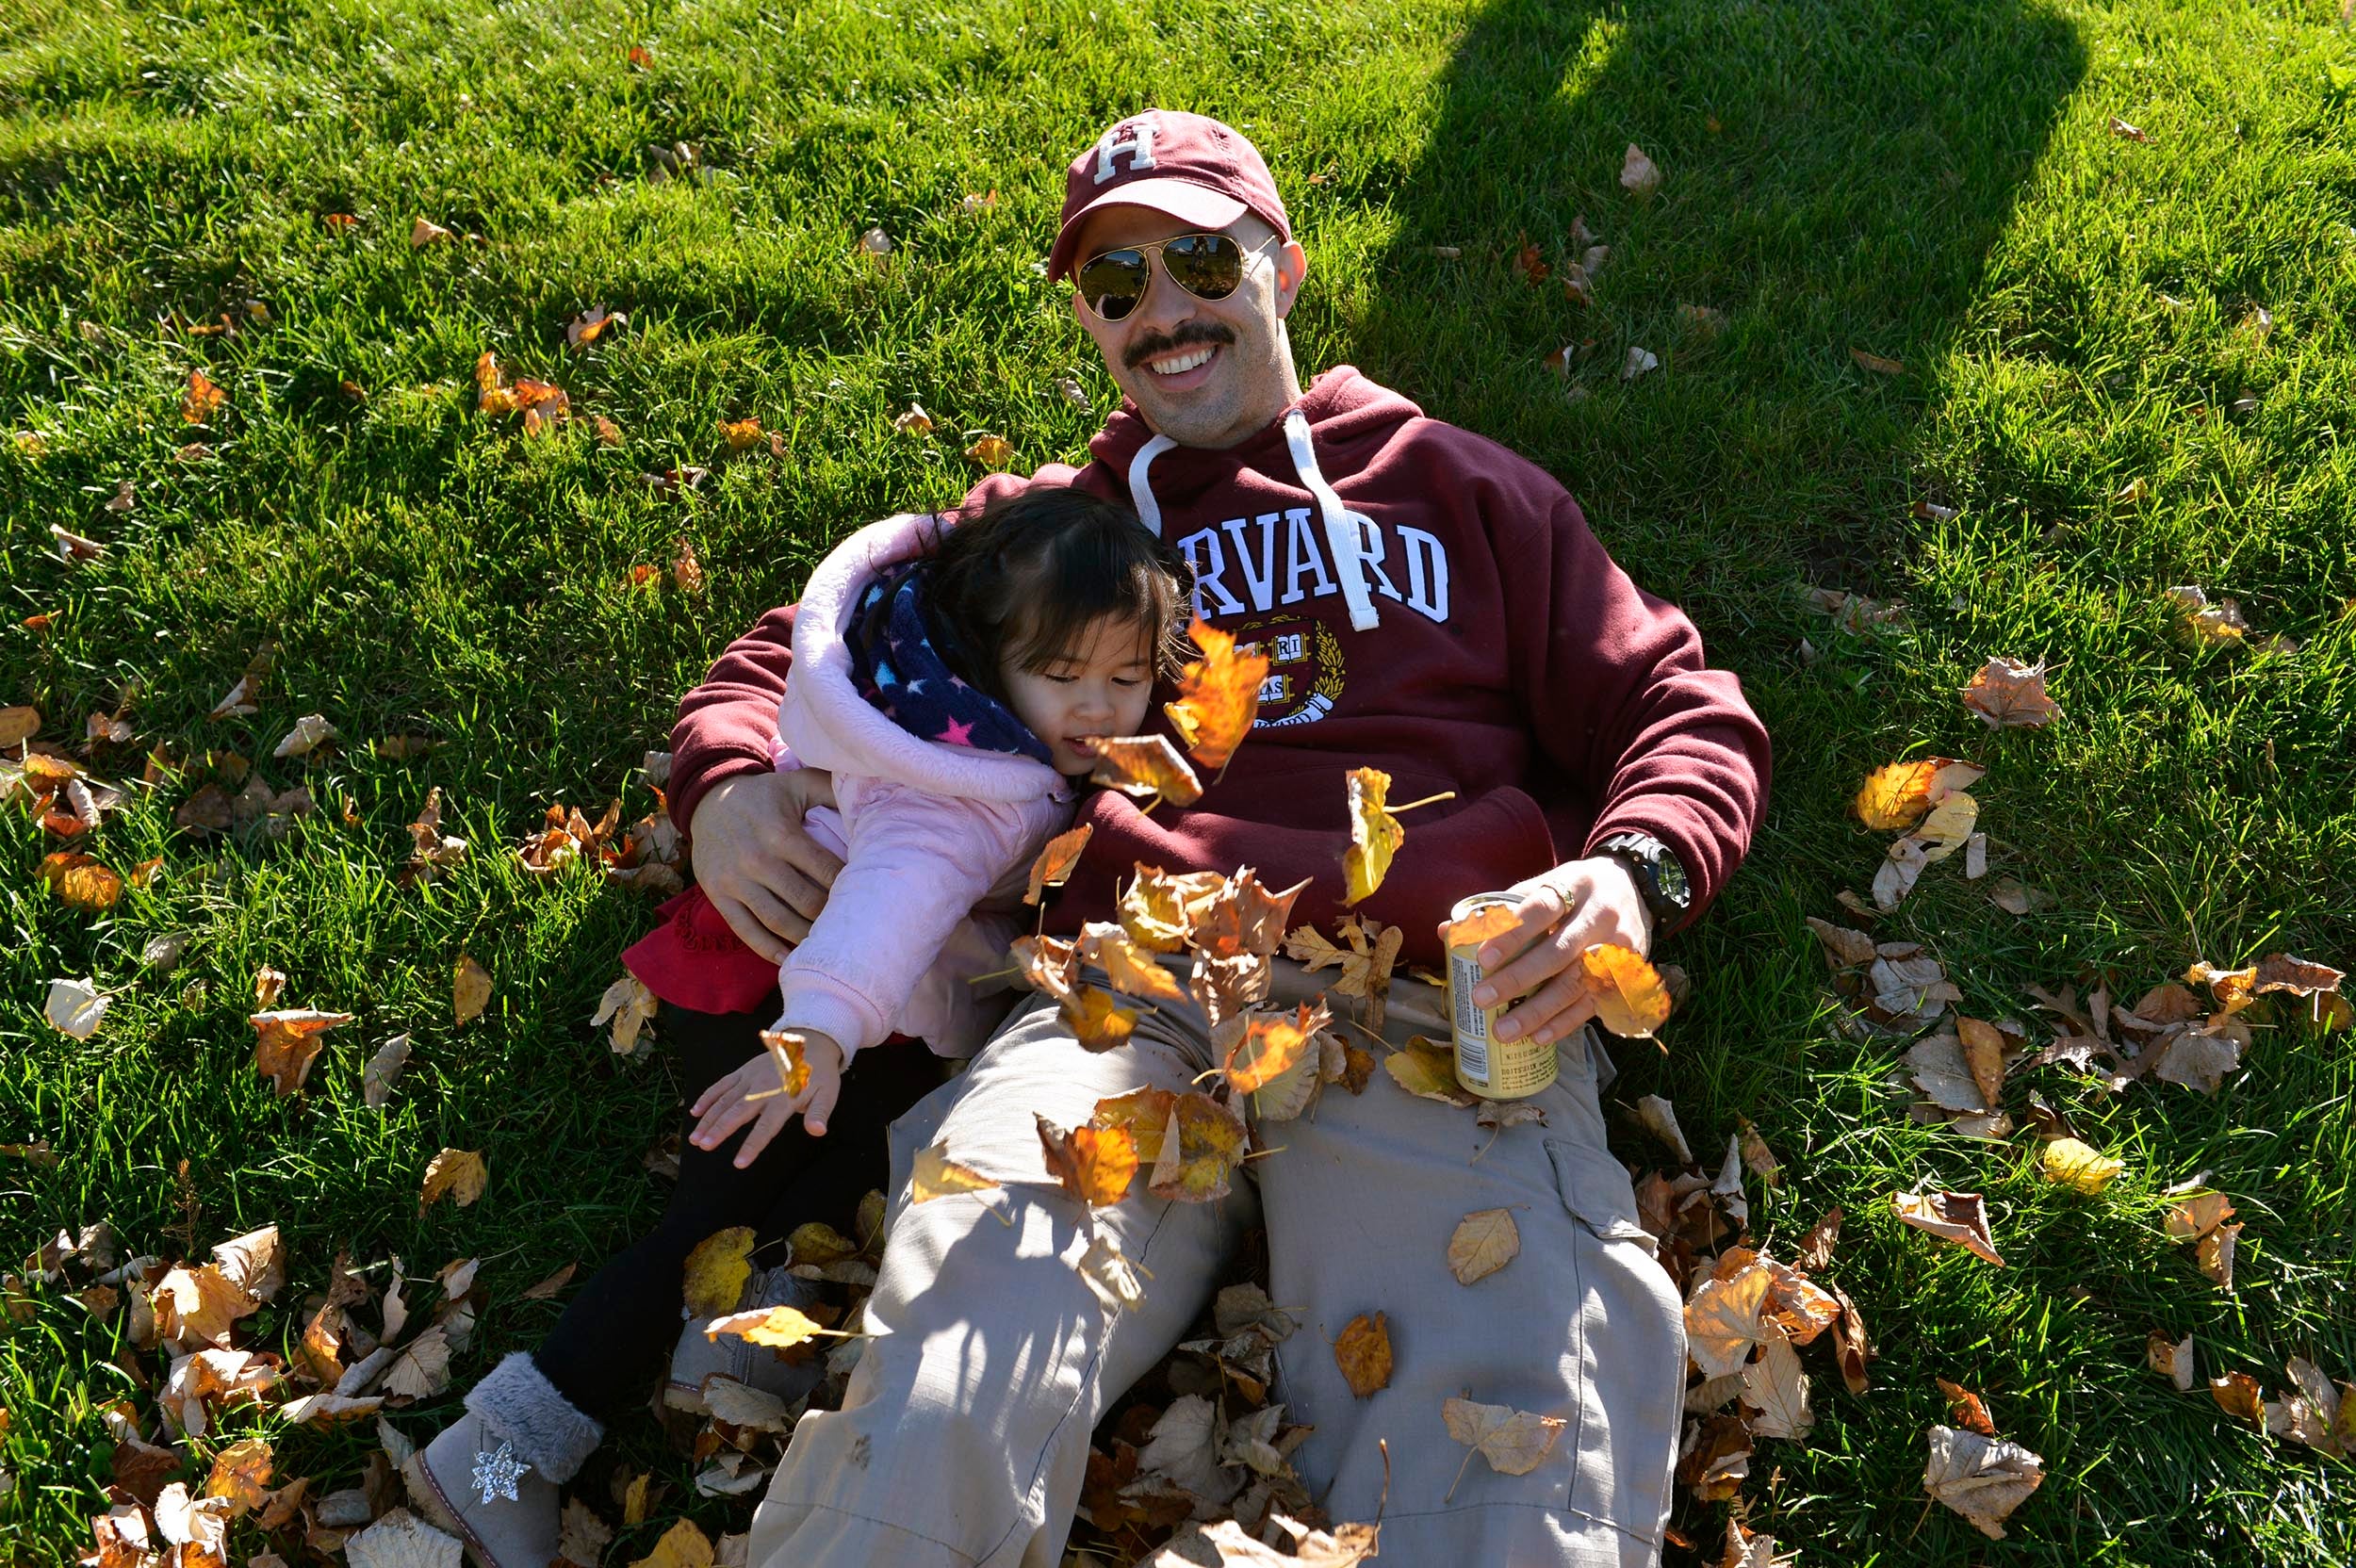 Nicholas Nesbit from Harvard Extension School rolls in the autumn leaves with his daughter Roisian, 2.